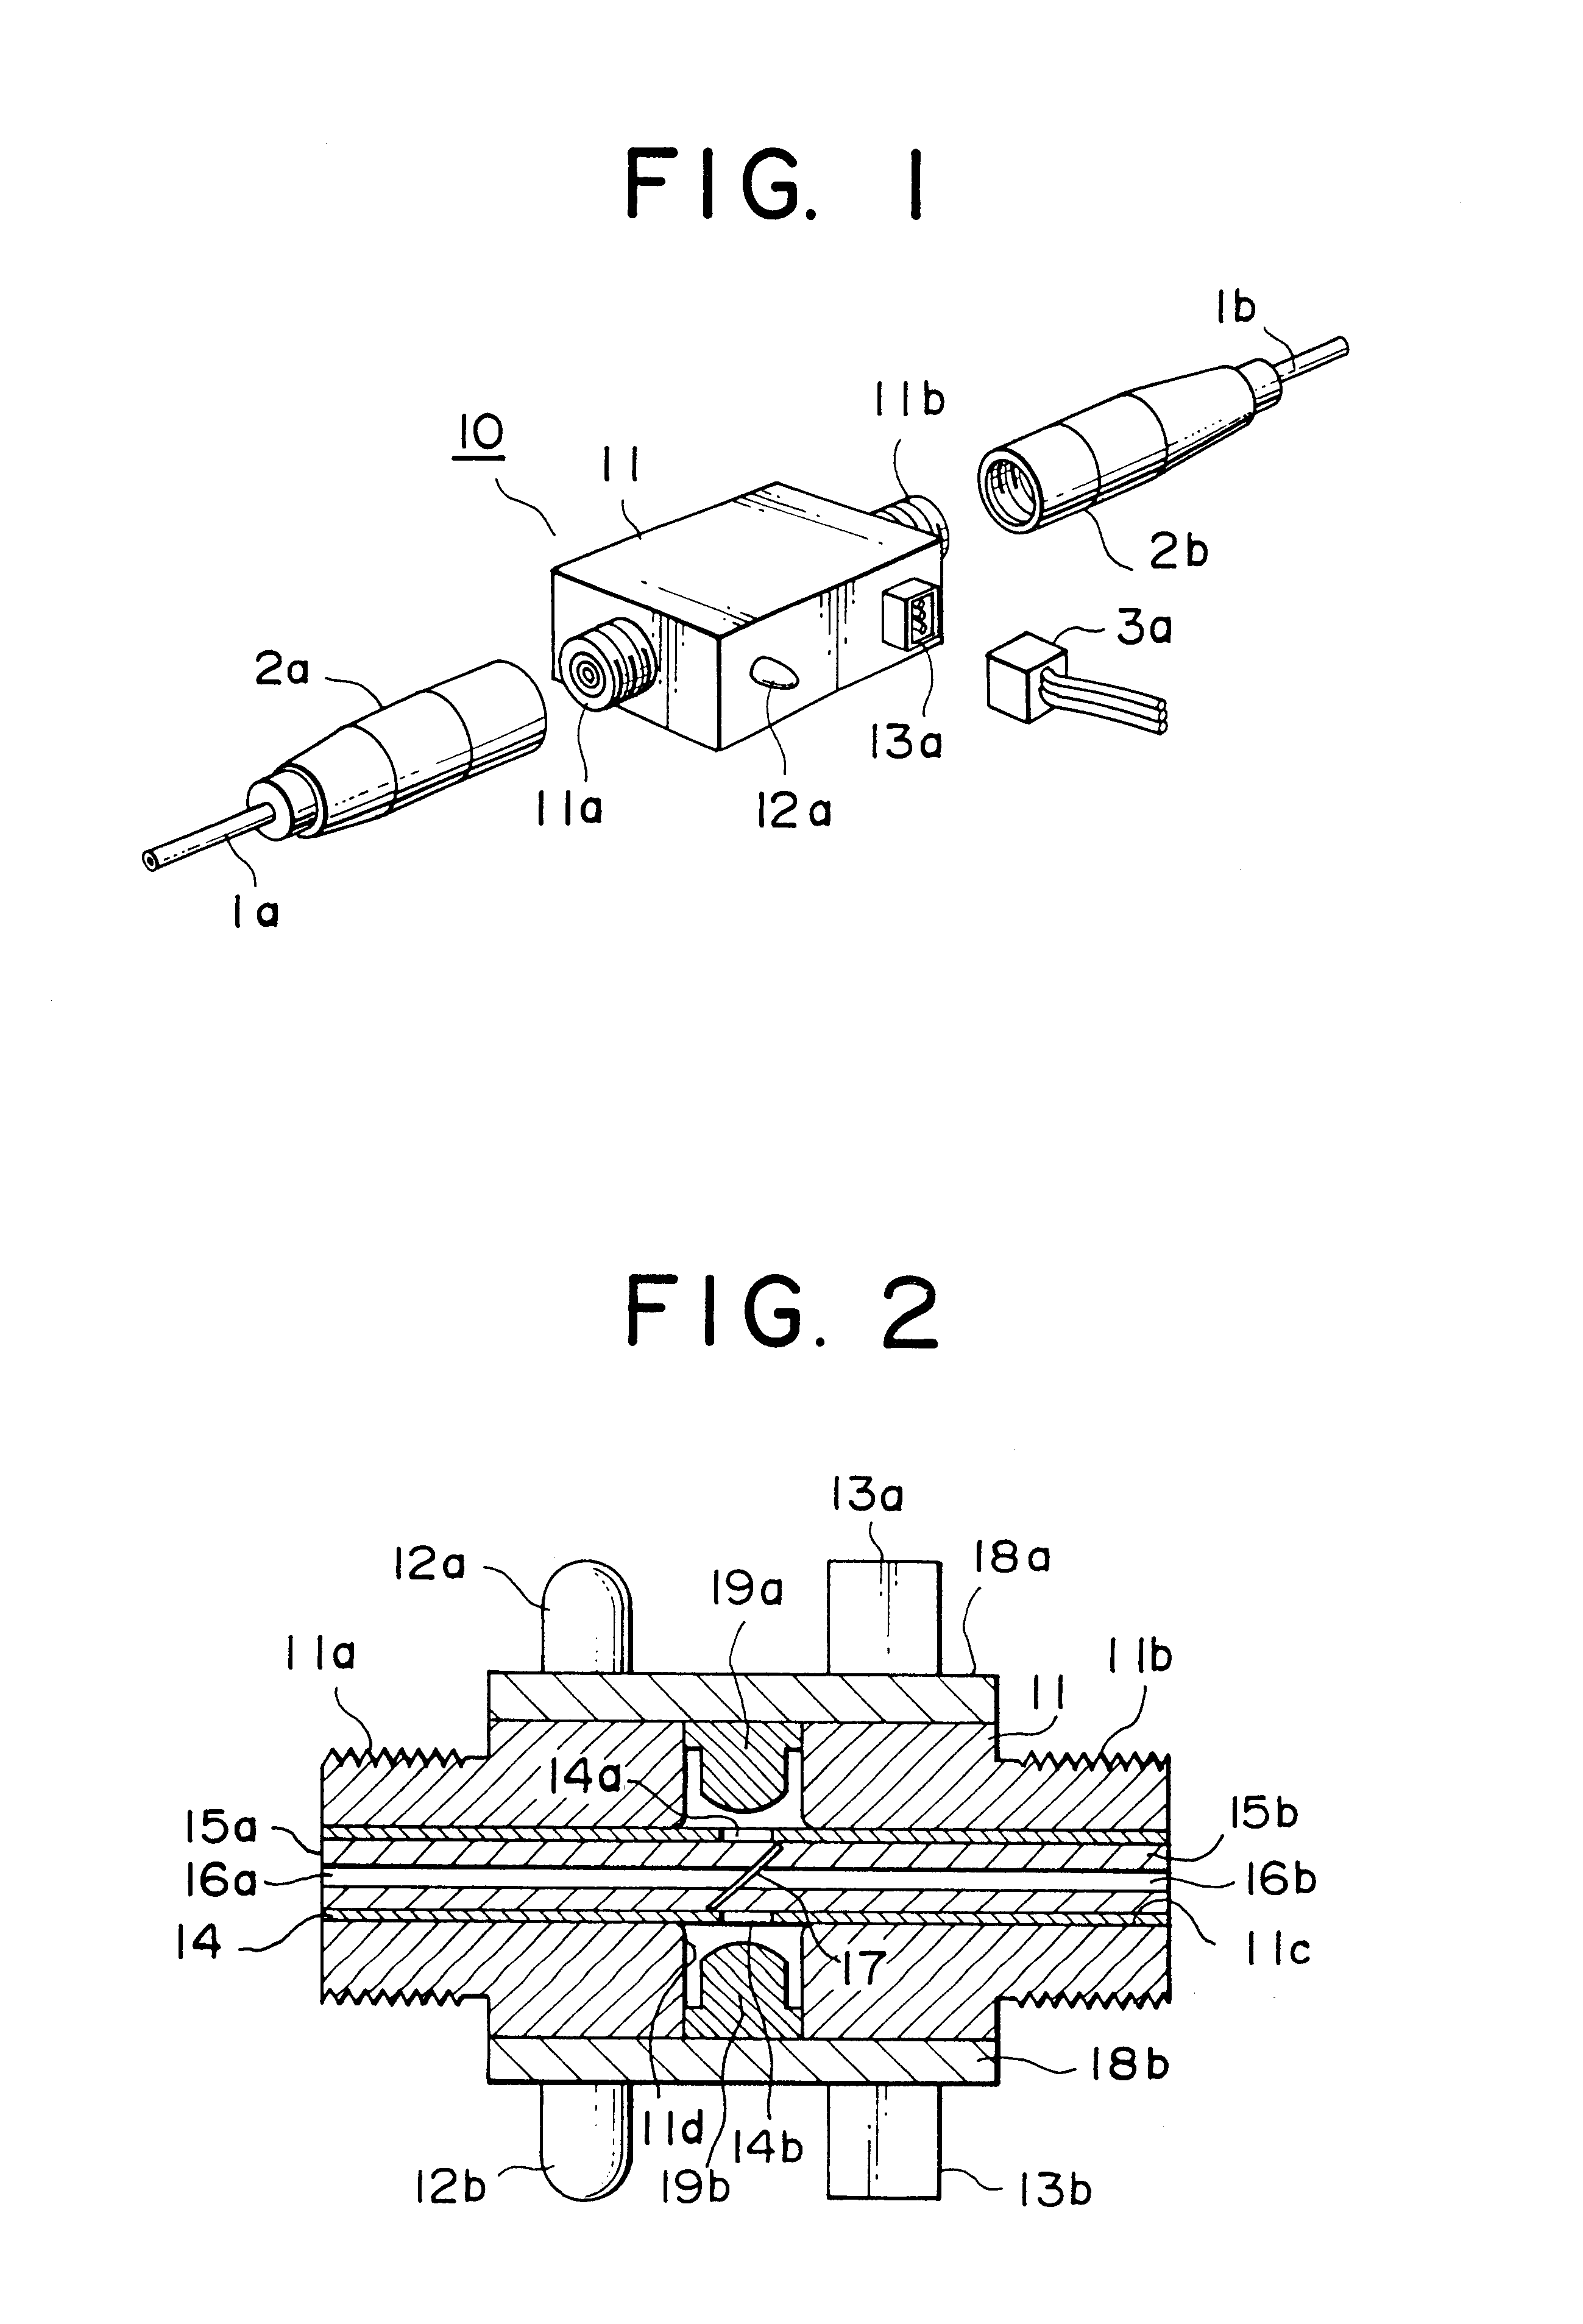 Optical repeating device with monitoring function